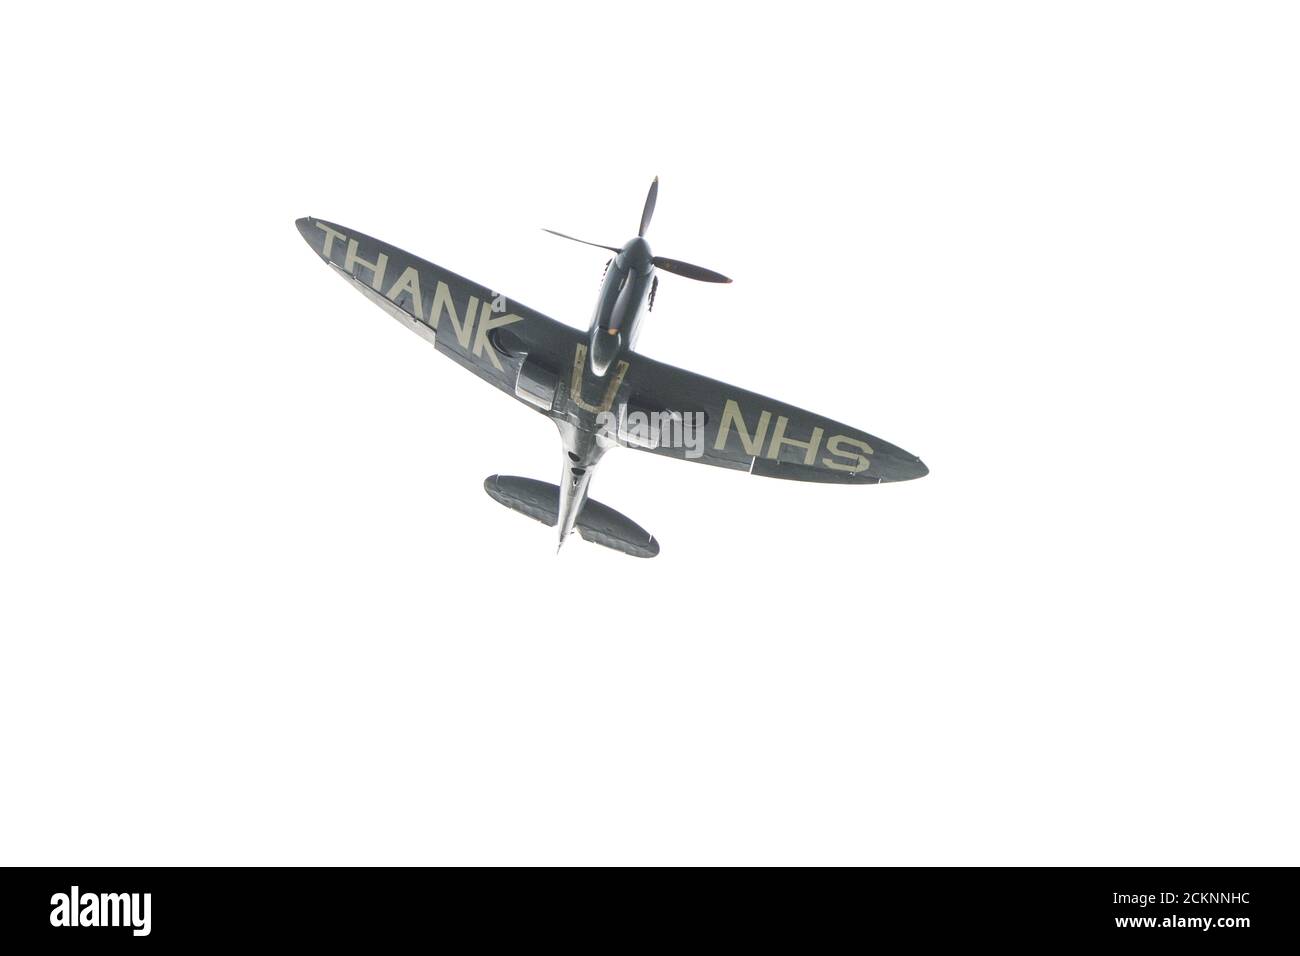 Cumbernauld, Scotland, UK. 16th Sep, 2020. Pictured: Special flight of a spitfire plane which has the message “THANK U NHS” painted onto the underside of the fuselage is seen doing aerobatics in front of a crowd which has gathered outside Cumbernauld Airport, before it is seen landing for the evening. Tomorrow the spitfire will go on around Scotland tour flying over various hospitals thanking the NHS for its hard work during the coronavirus (COVID-19) pandemic. Credit: Colin Fisher/Alamy Live News Stock Photo